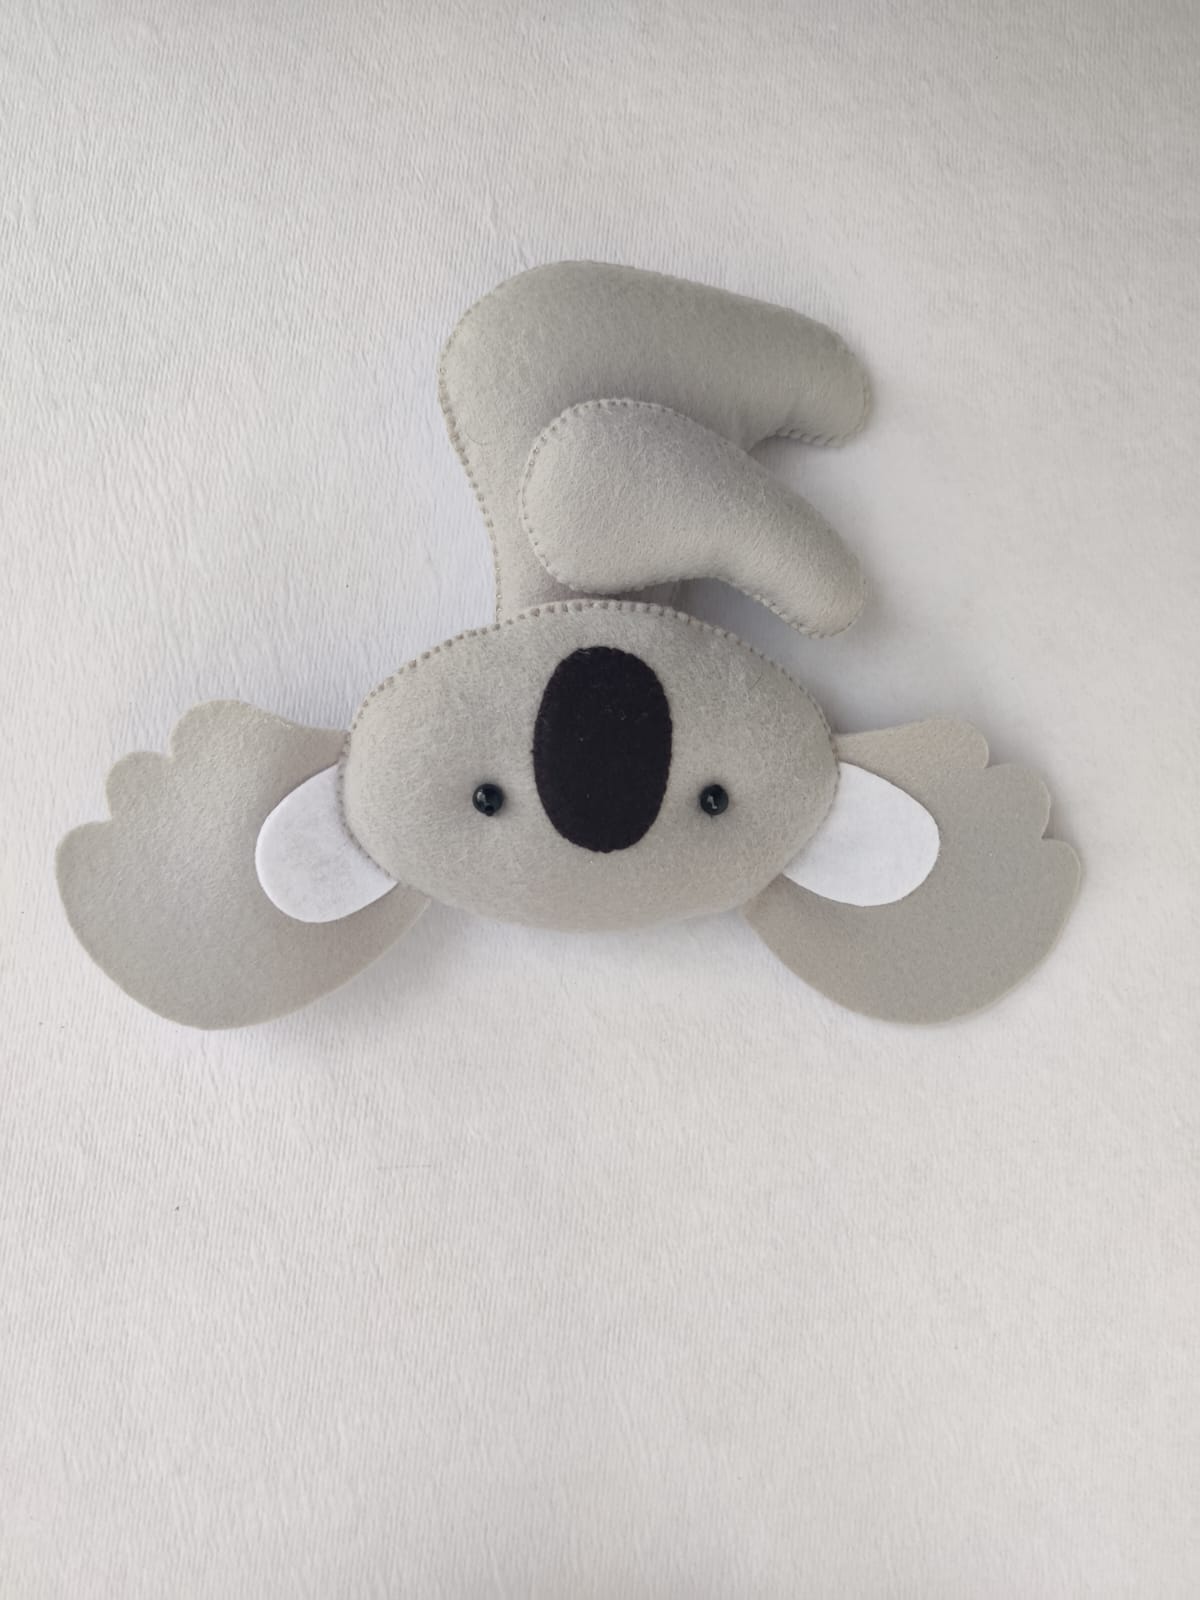 Cute and Cuddly Felt Grey Elephant: Soft Plush Toys for Toddlers Kids (PREPAID ORDER)